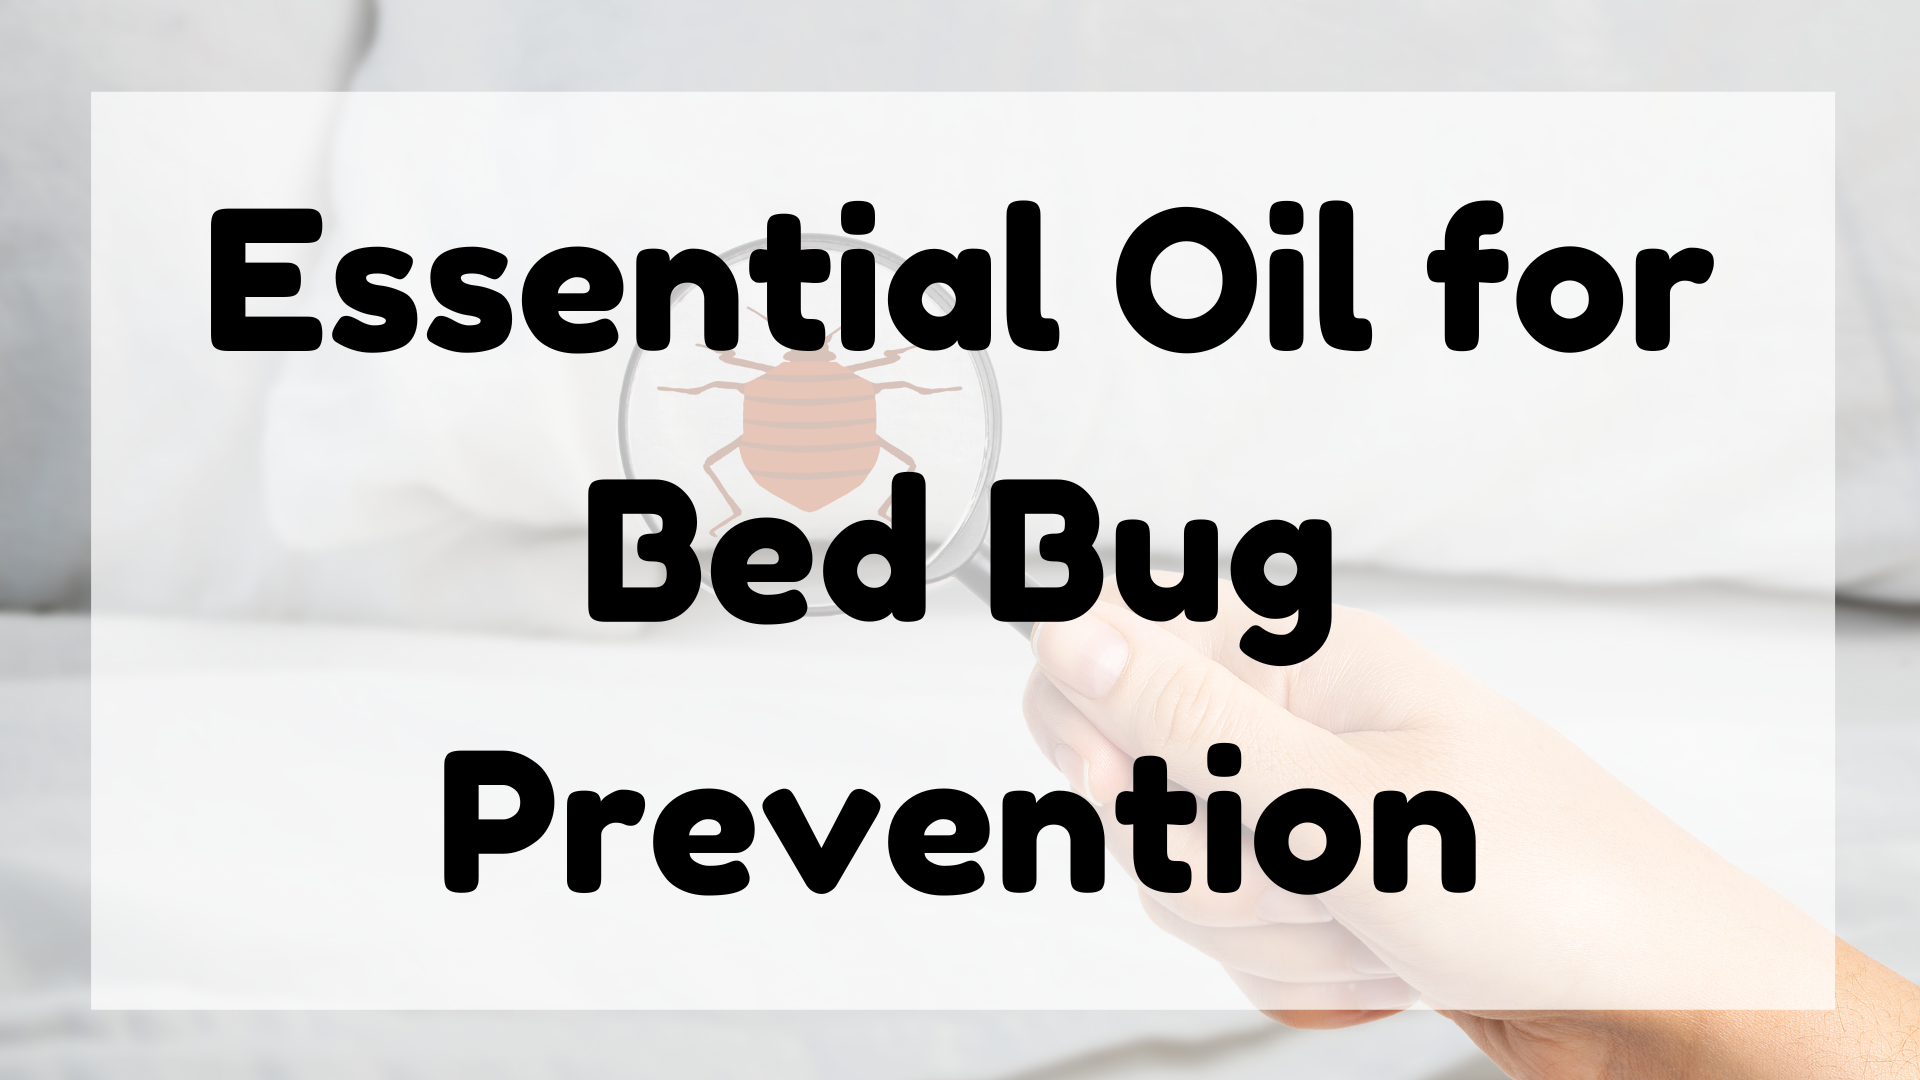 Essential Oil for Bed Bug Prevention featured image